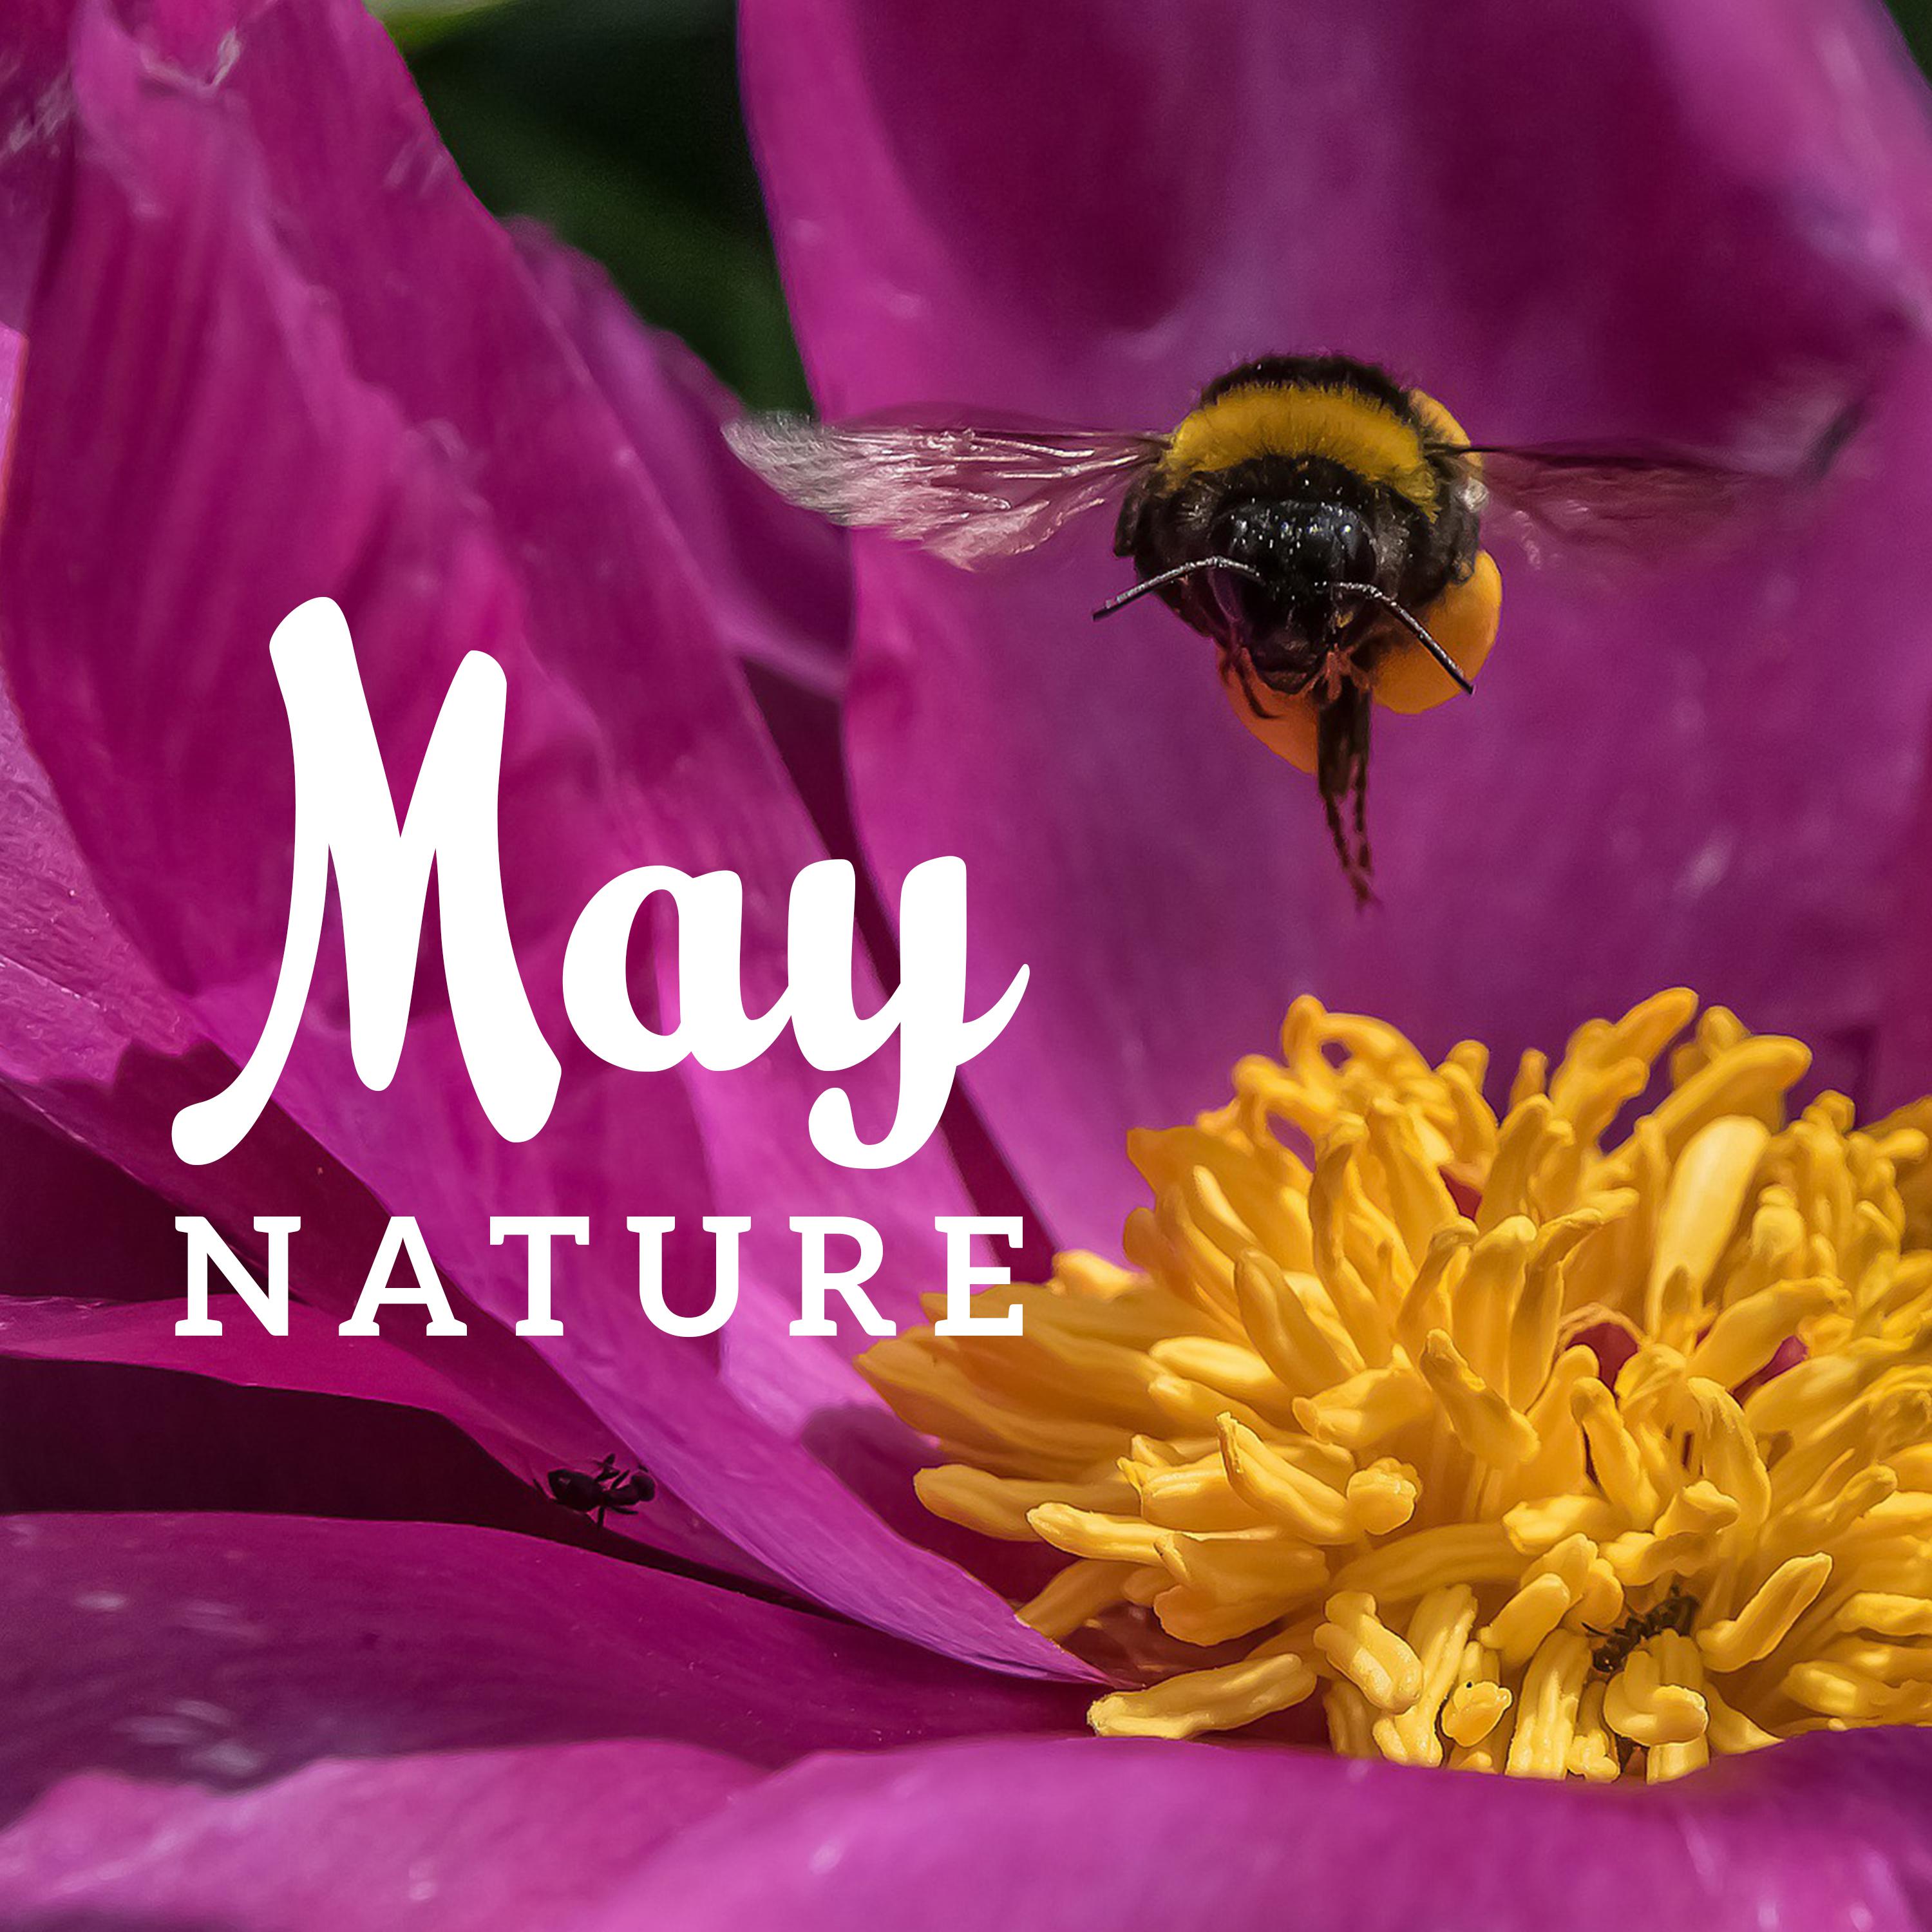 May Nature (30 Sounds of Relaxing Mixed Nature, Meditation, Sleep & Wellness Music)